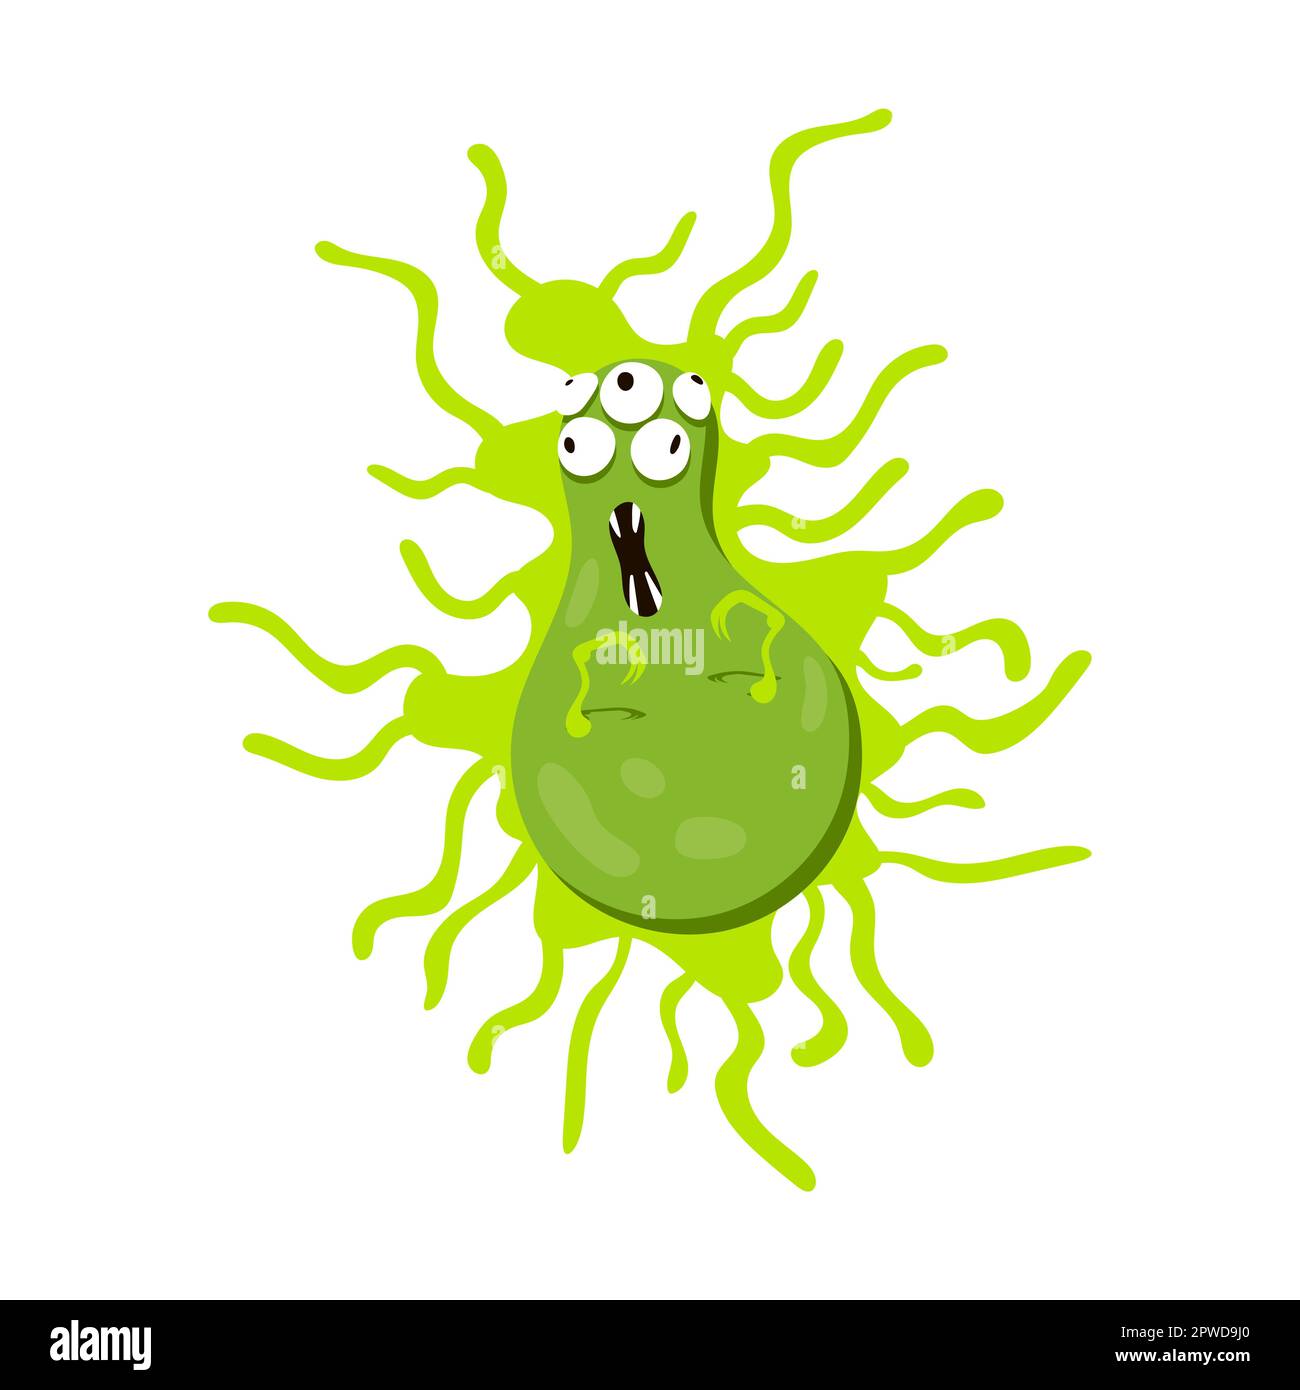 Funny bacteria with long tentacles and germ character. Vector illustration of ugly micro creature with scary face, eyes and teeth Stock Vector